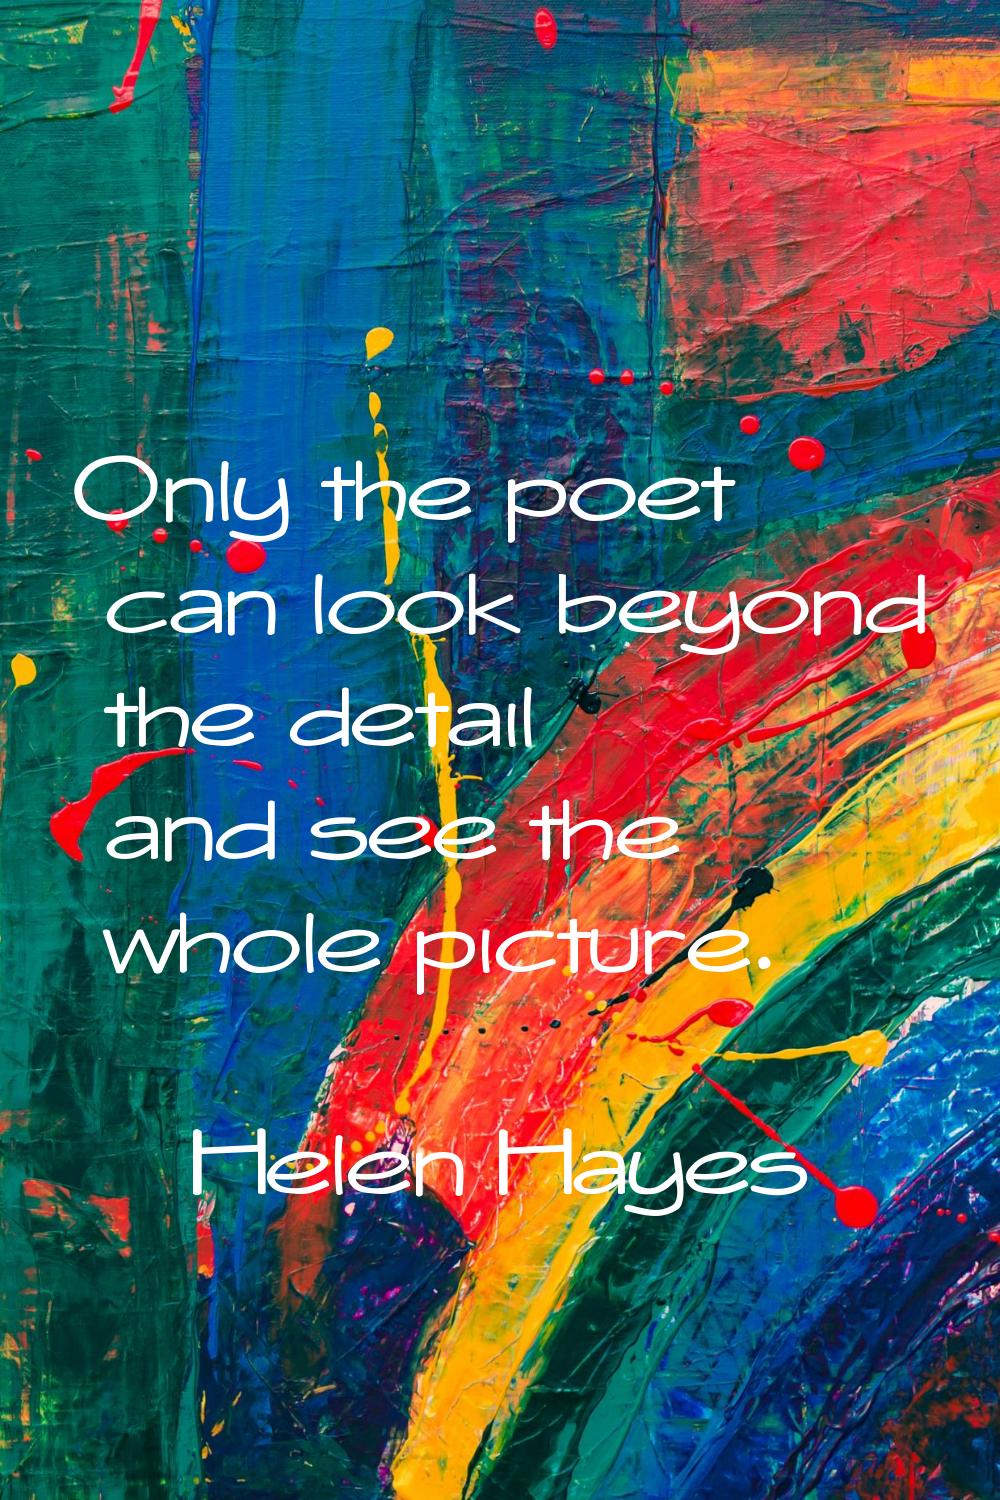 Only the poet can look beyond the detail and see the whole picture.